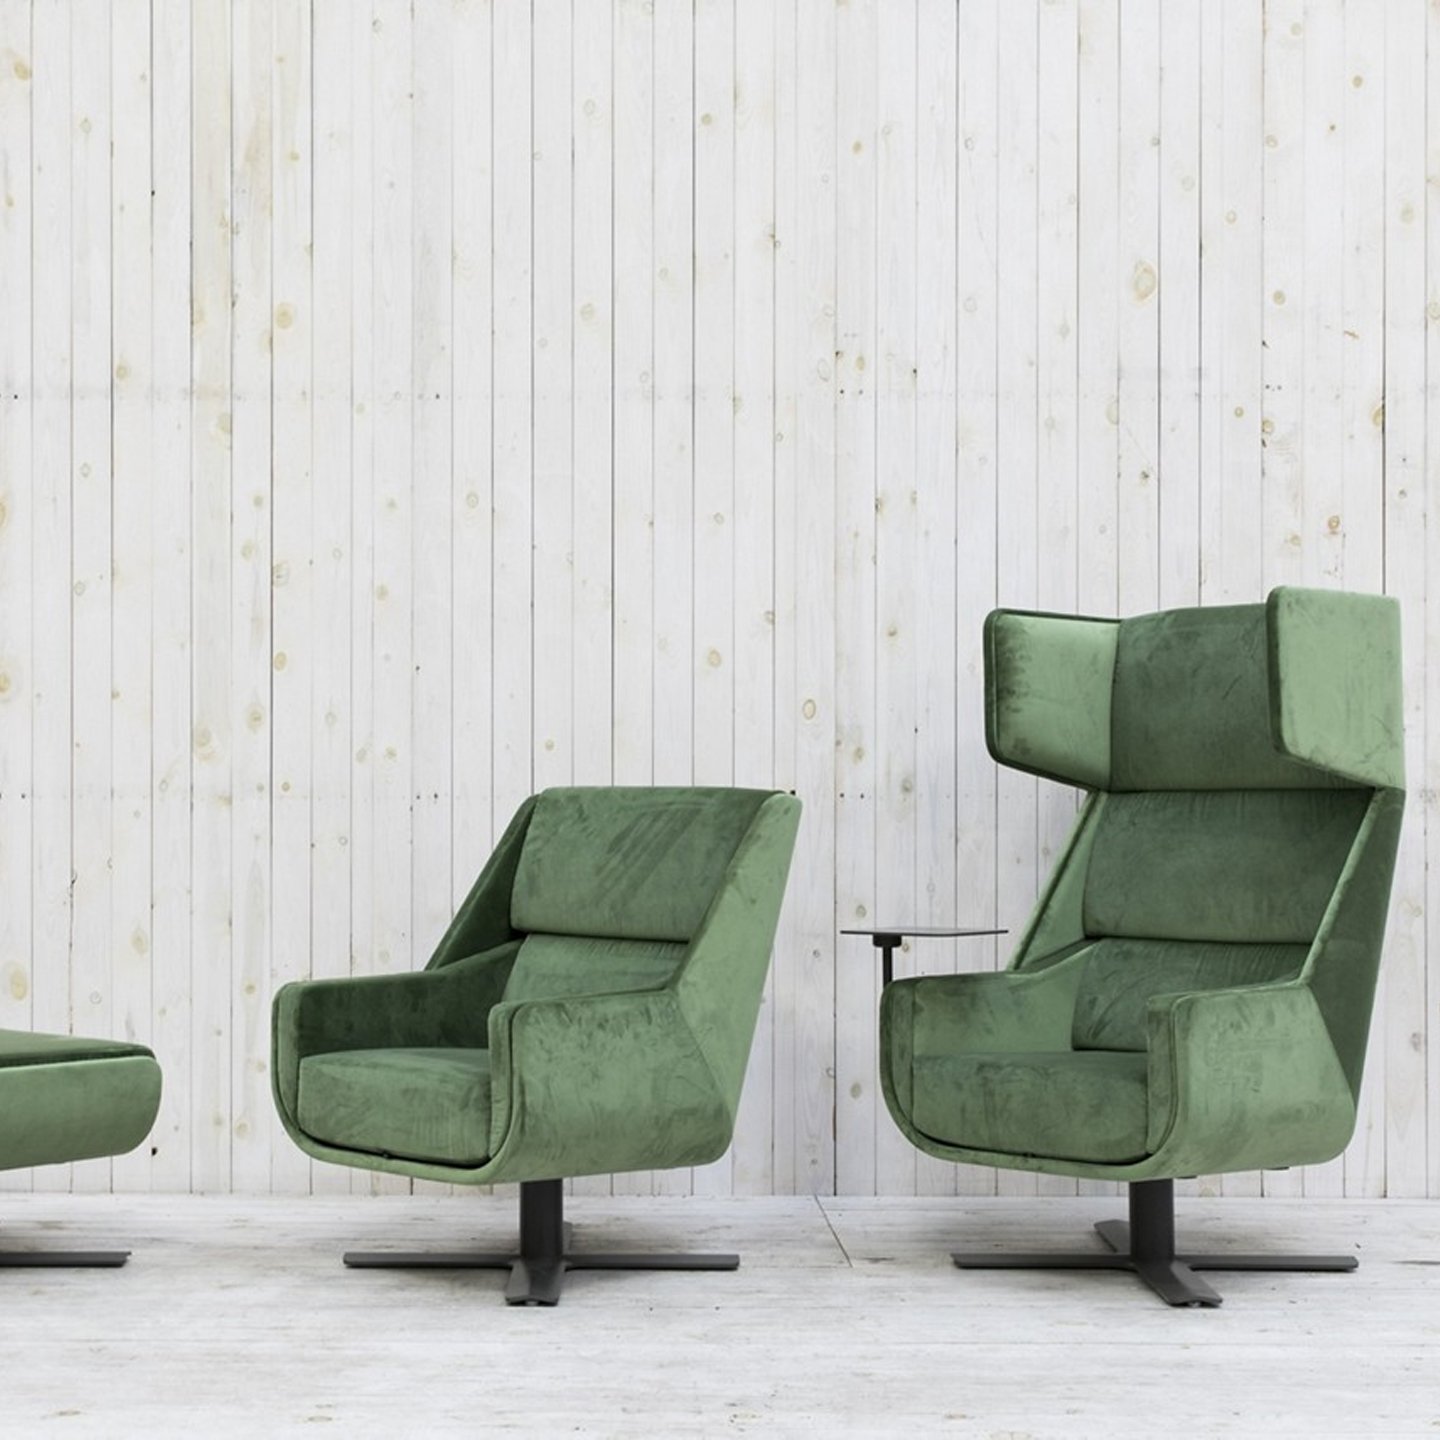 Haworth Buzzime chairs in green suede in an office